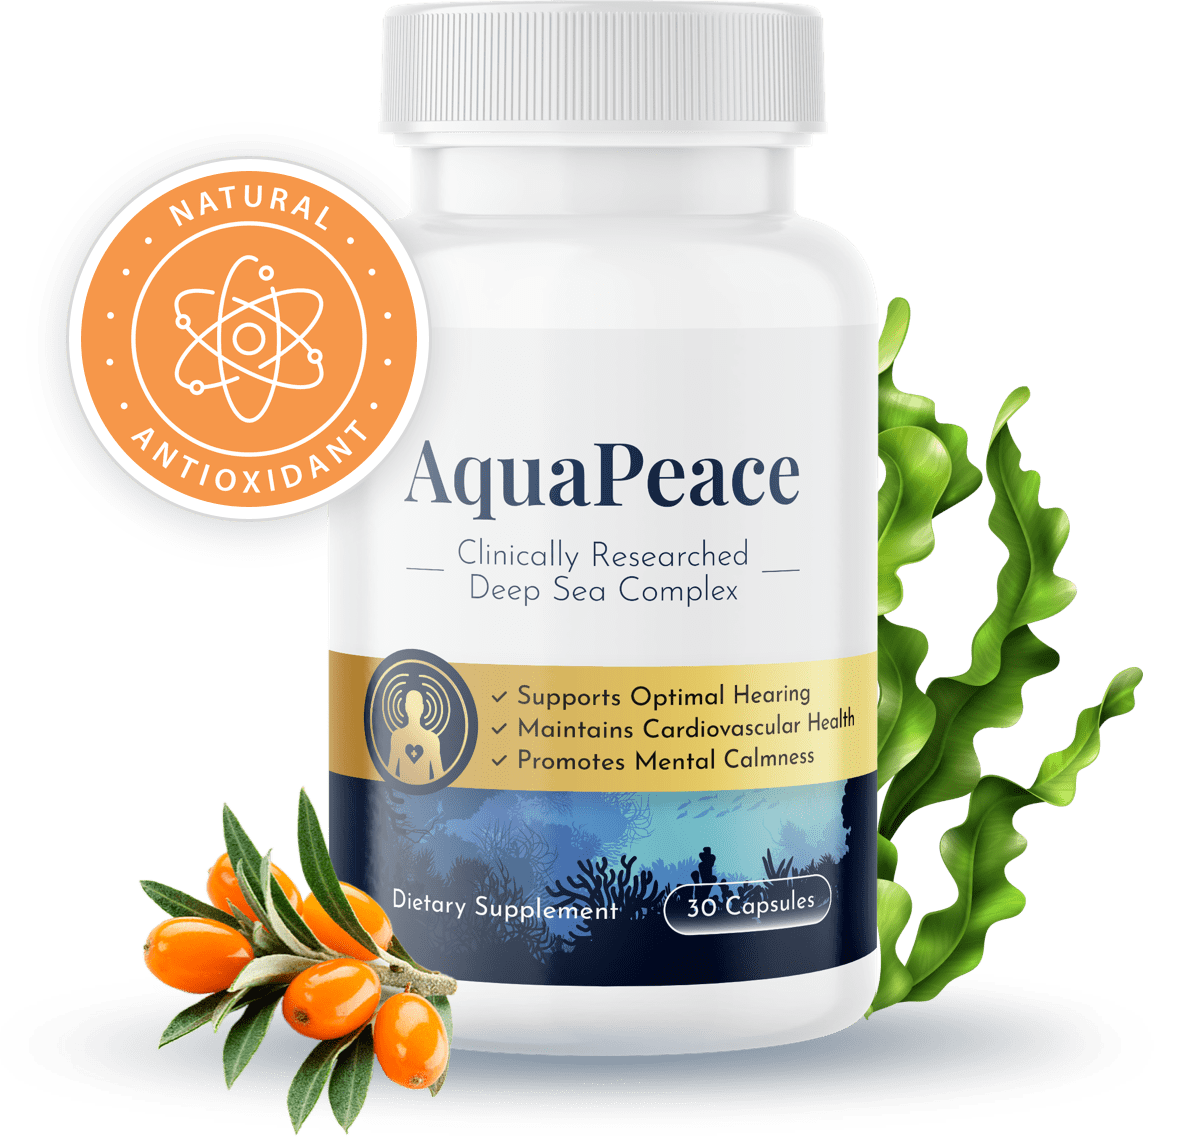 Shop AquaPeace - Natural Solution for Ear Health and Function